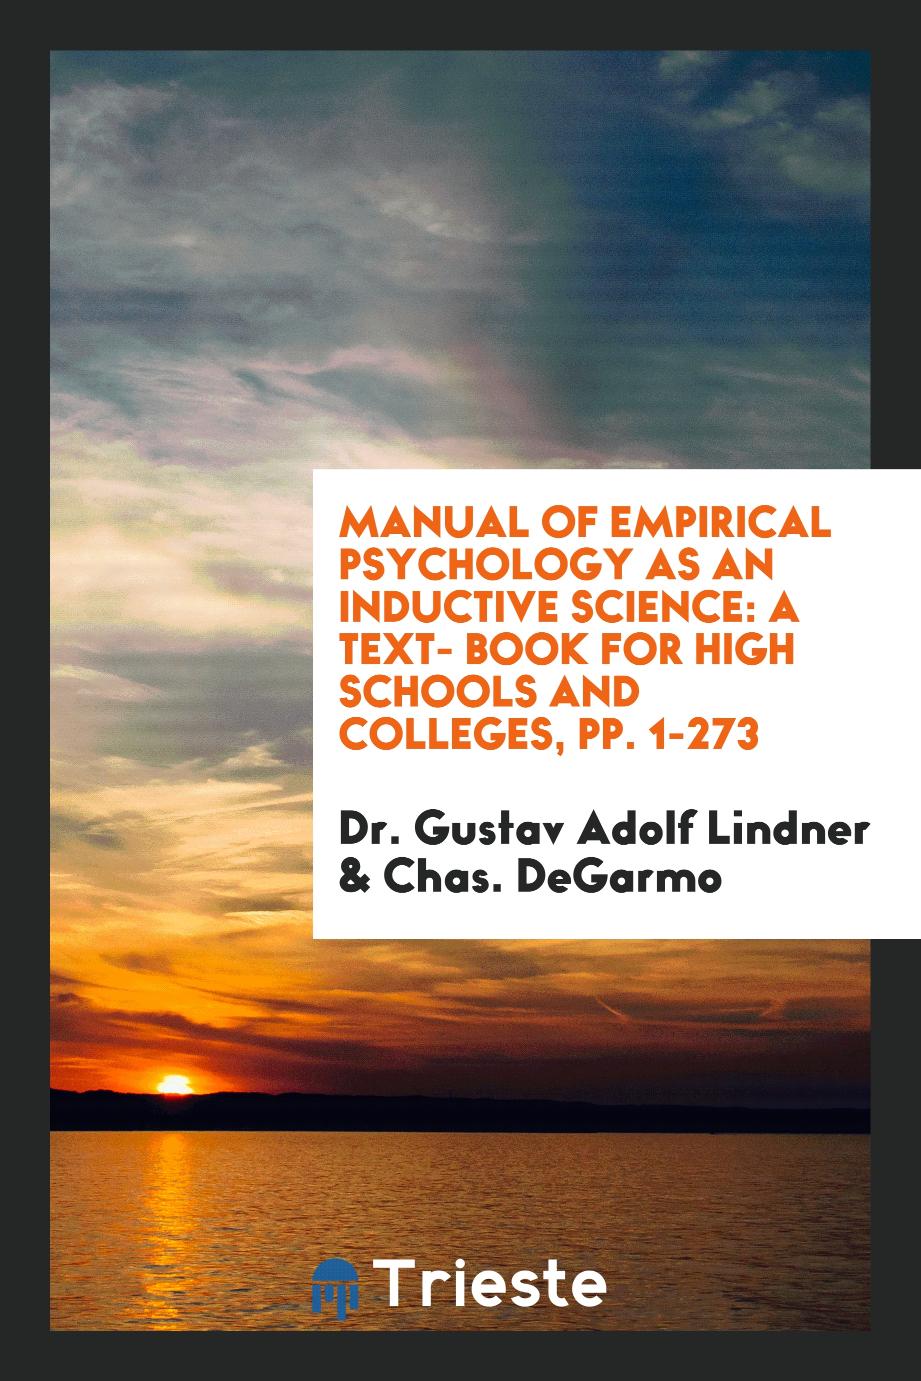 Manual of Empirical Psychology as an Inductive Science: A Text- Book for High Schools and Colleges, pp. 1-273